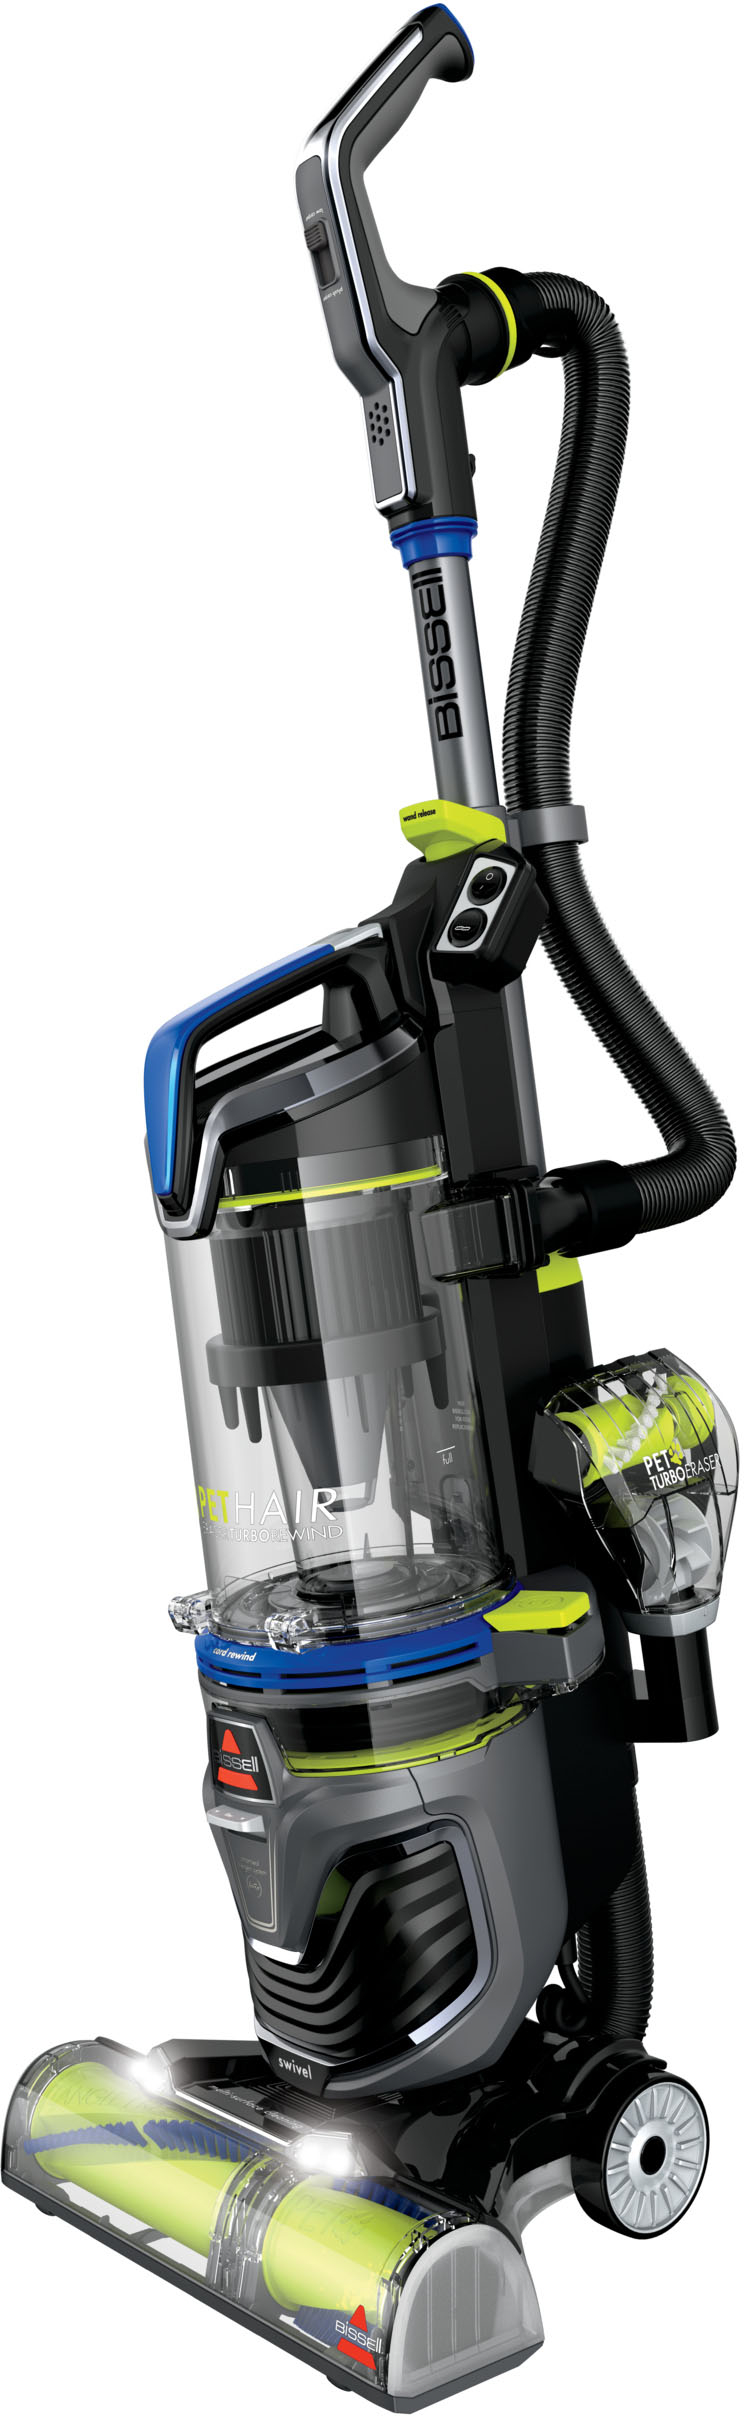 Angle View: BISSELL Pet Hair Eraser Turbo Rewind Upright Vacuum - Cobalt Blue and Electric Green